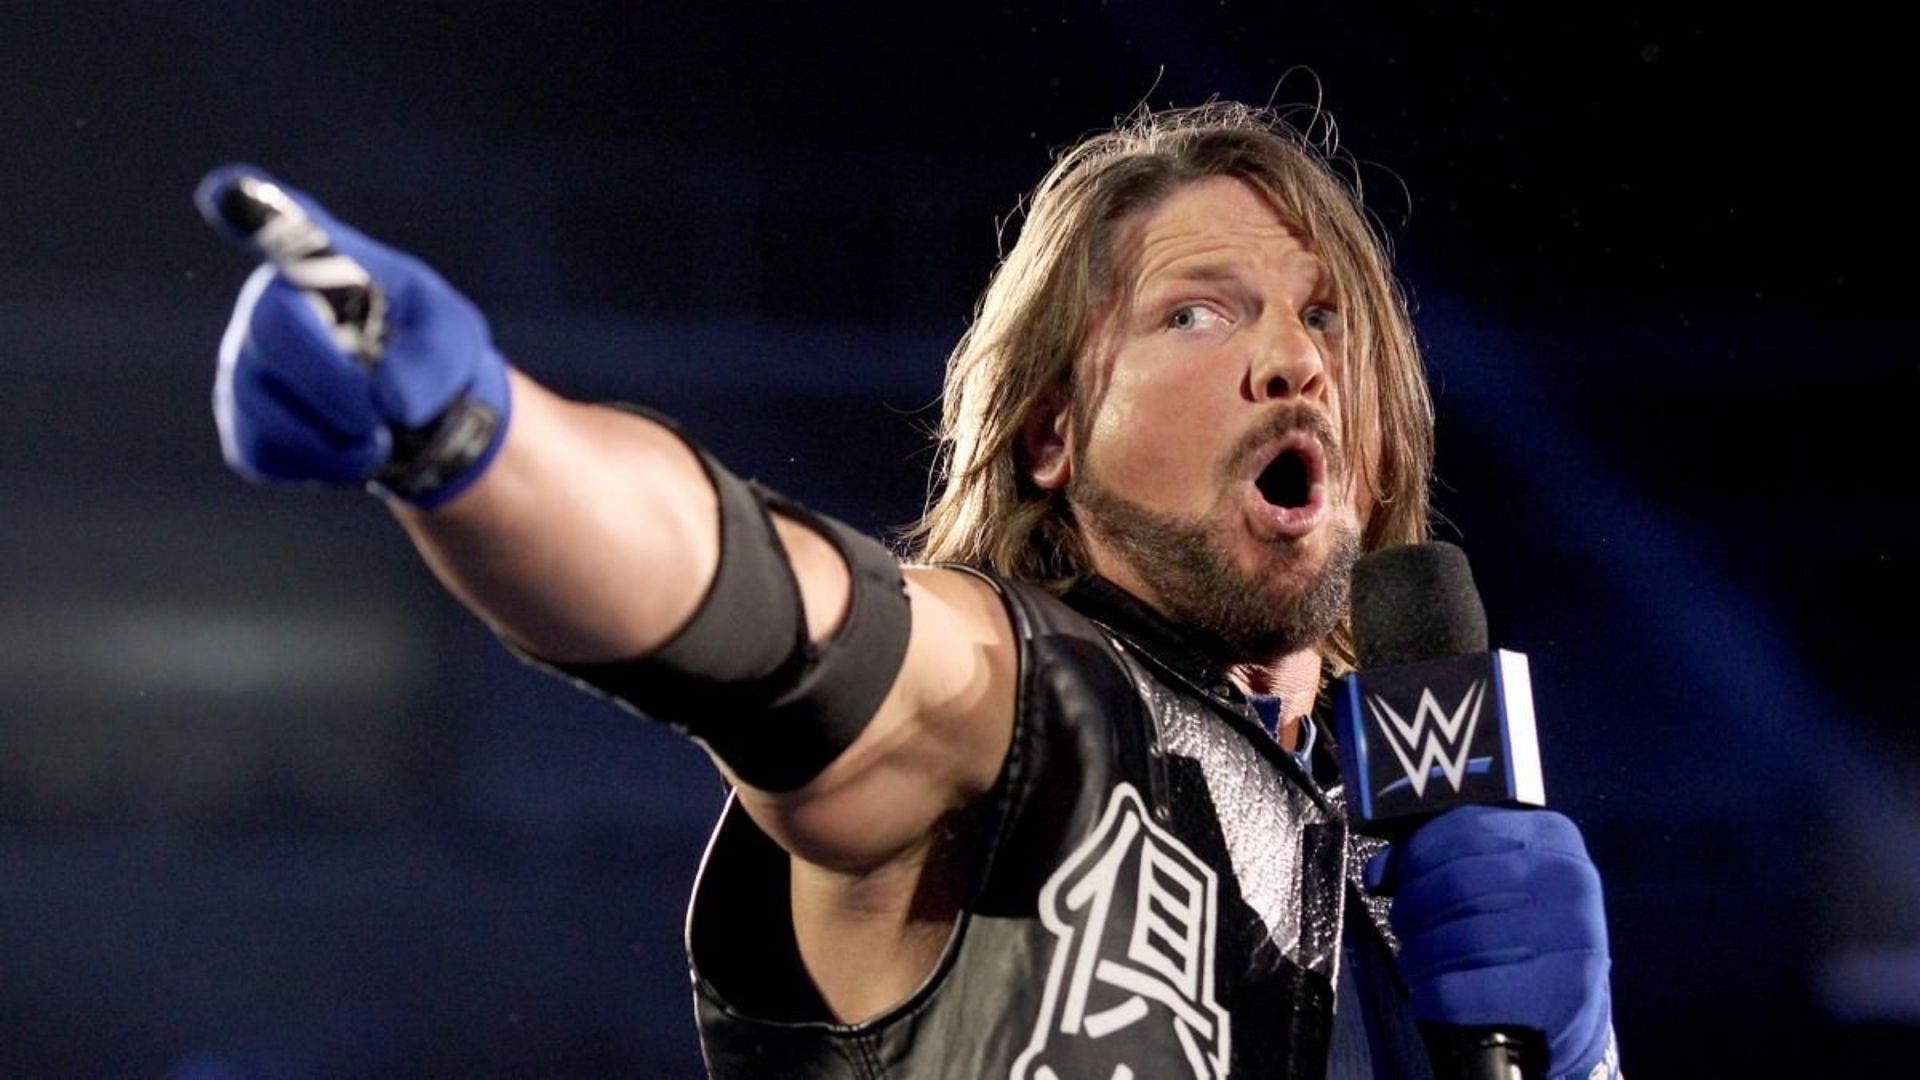 Wrestling legend AJ Styles is a member of the SmackDown roster in present day